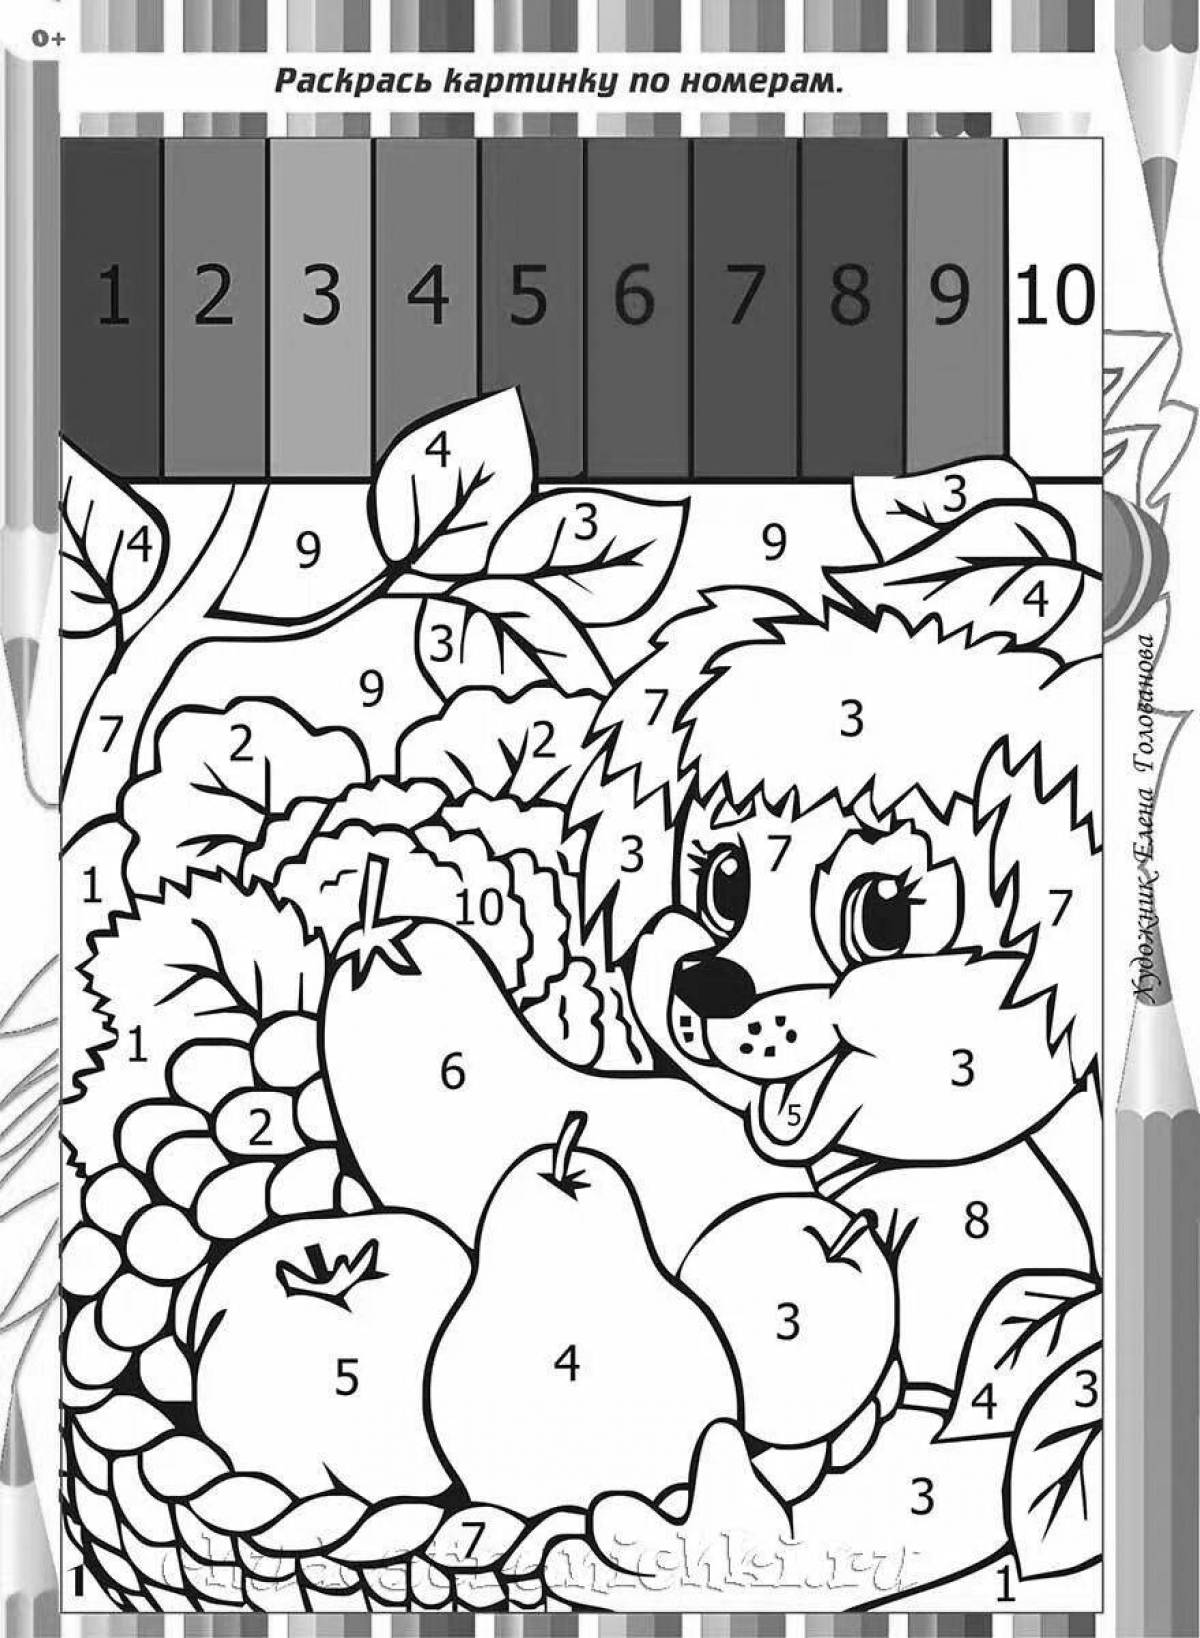 Coloring funny bear by numbers